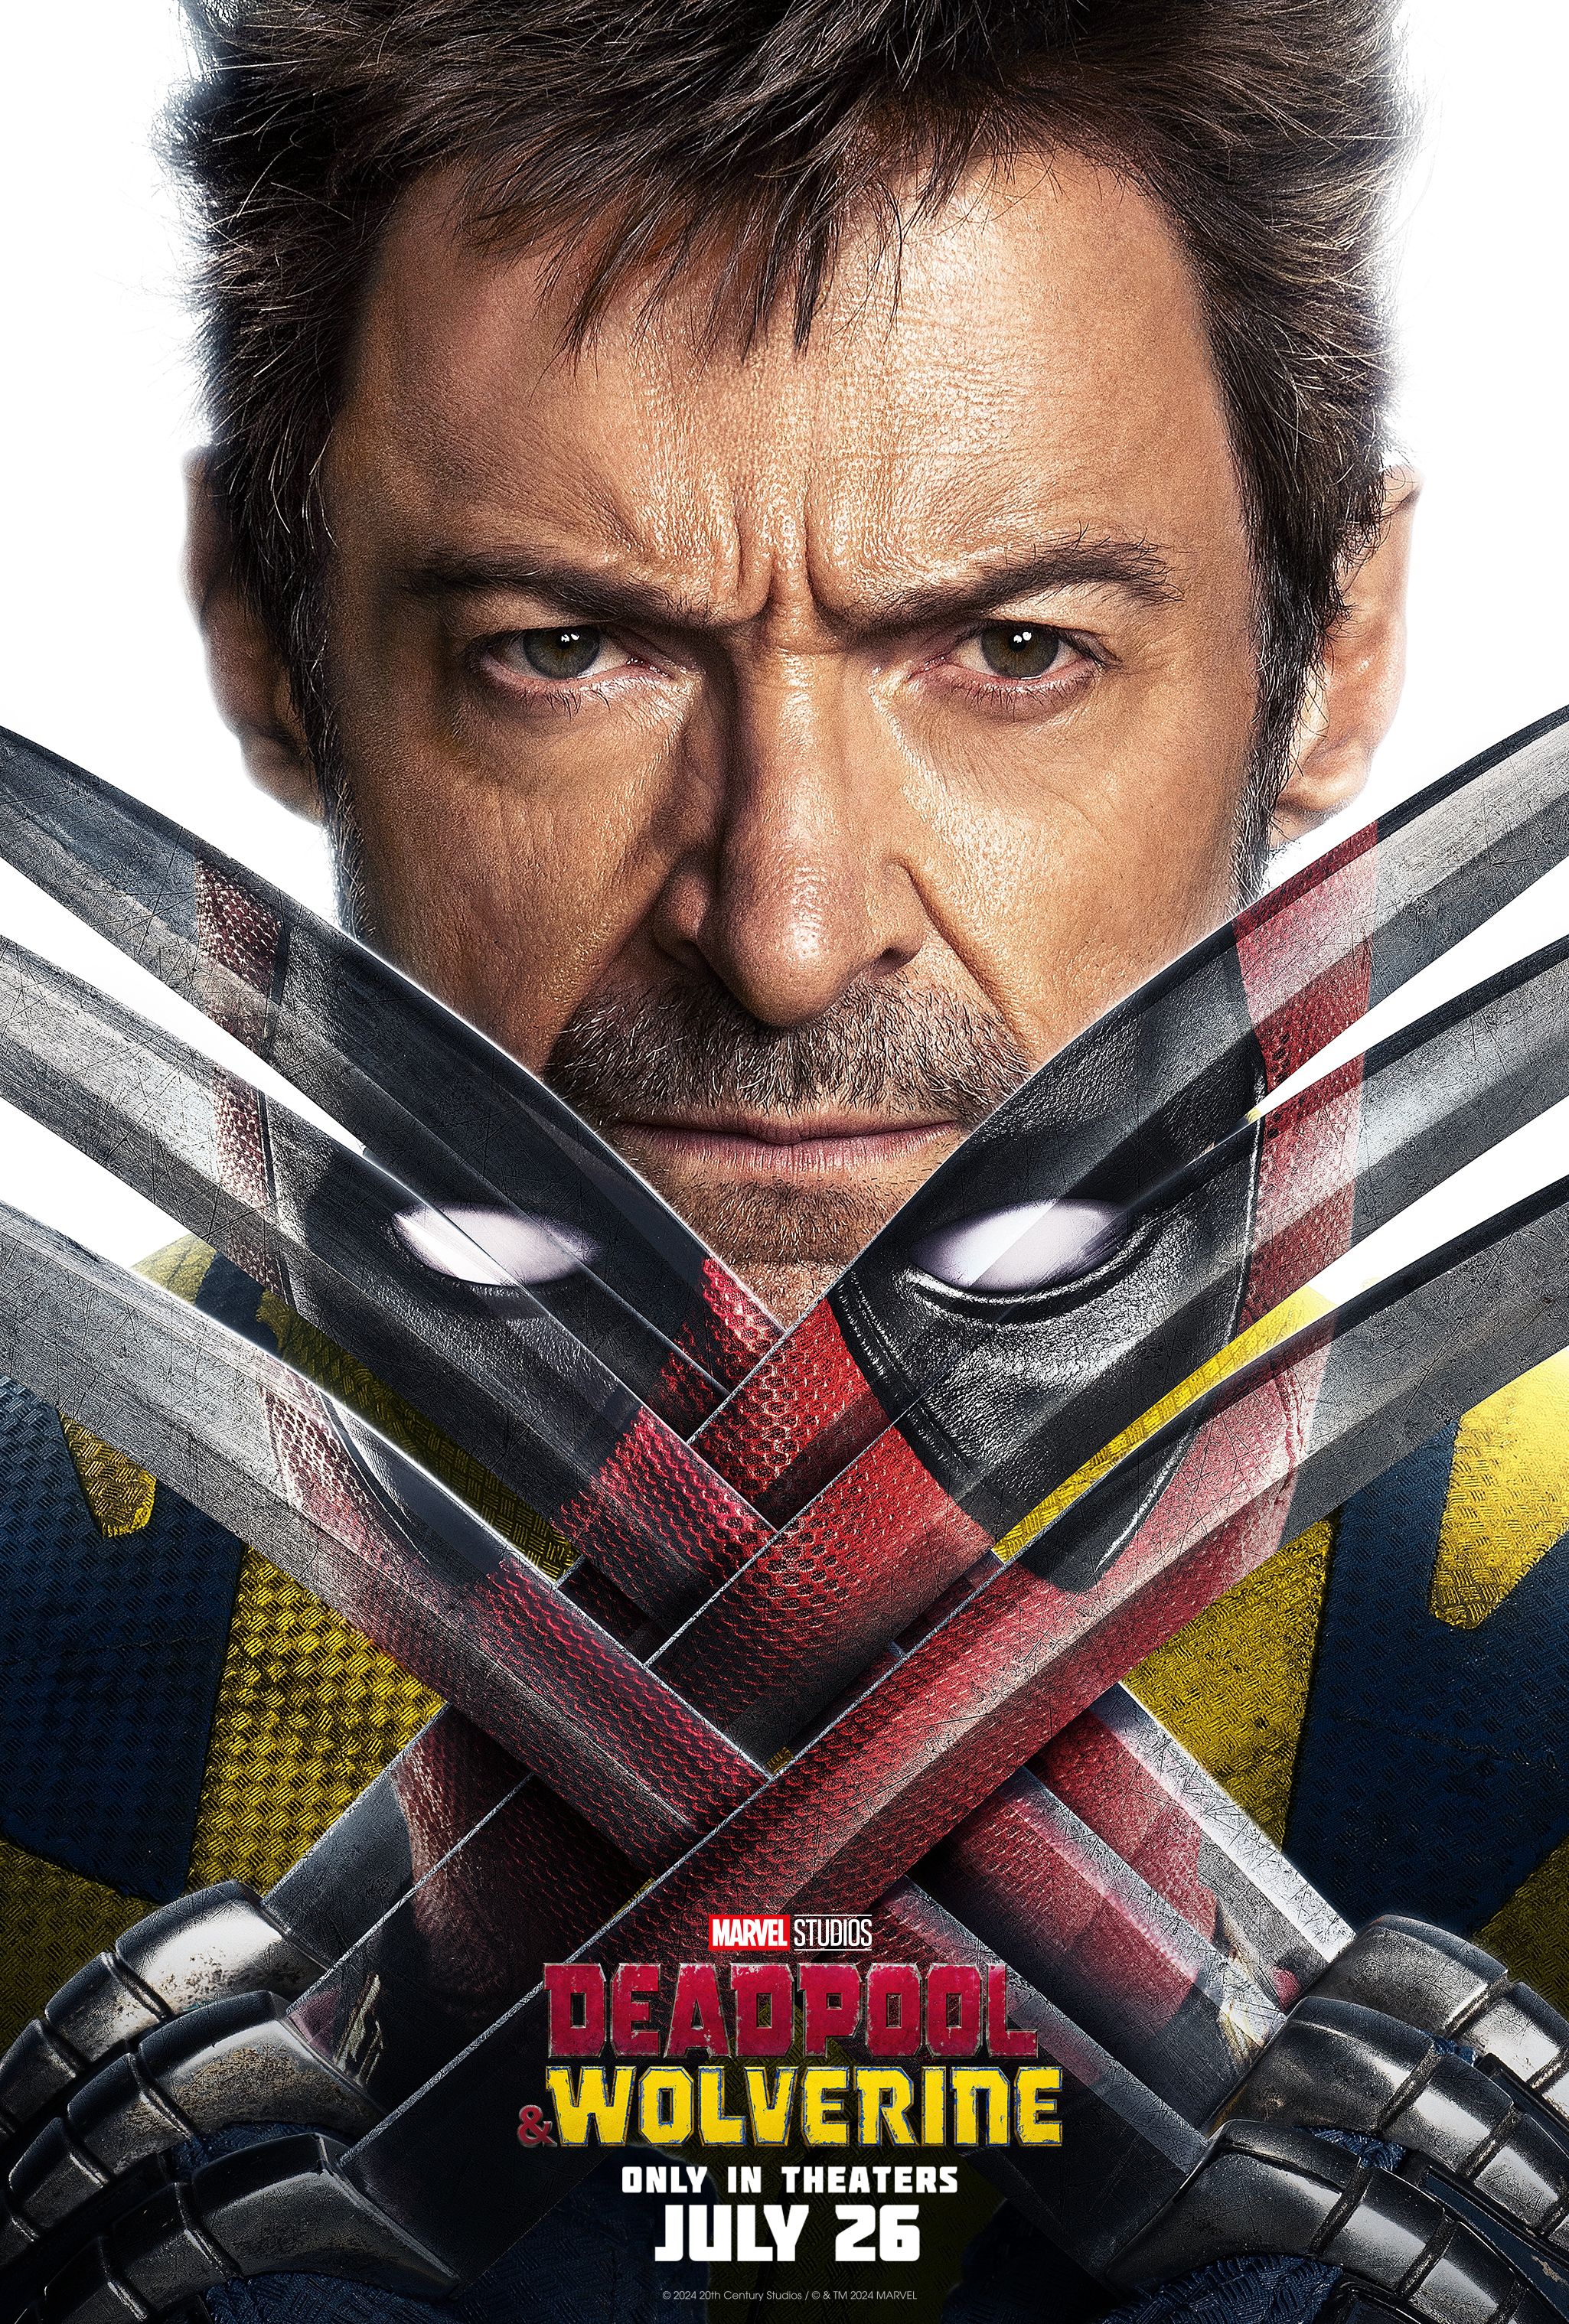 Hugh Jackman's Wolverine showing off his claws with Deadpool's reflection in it.